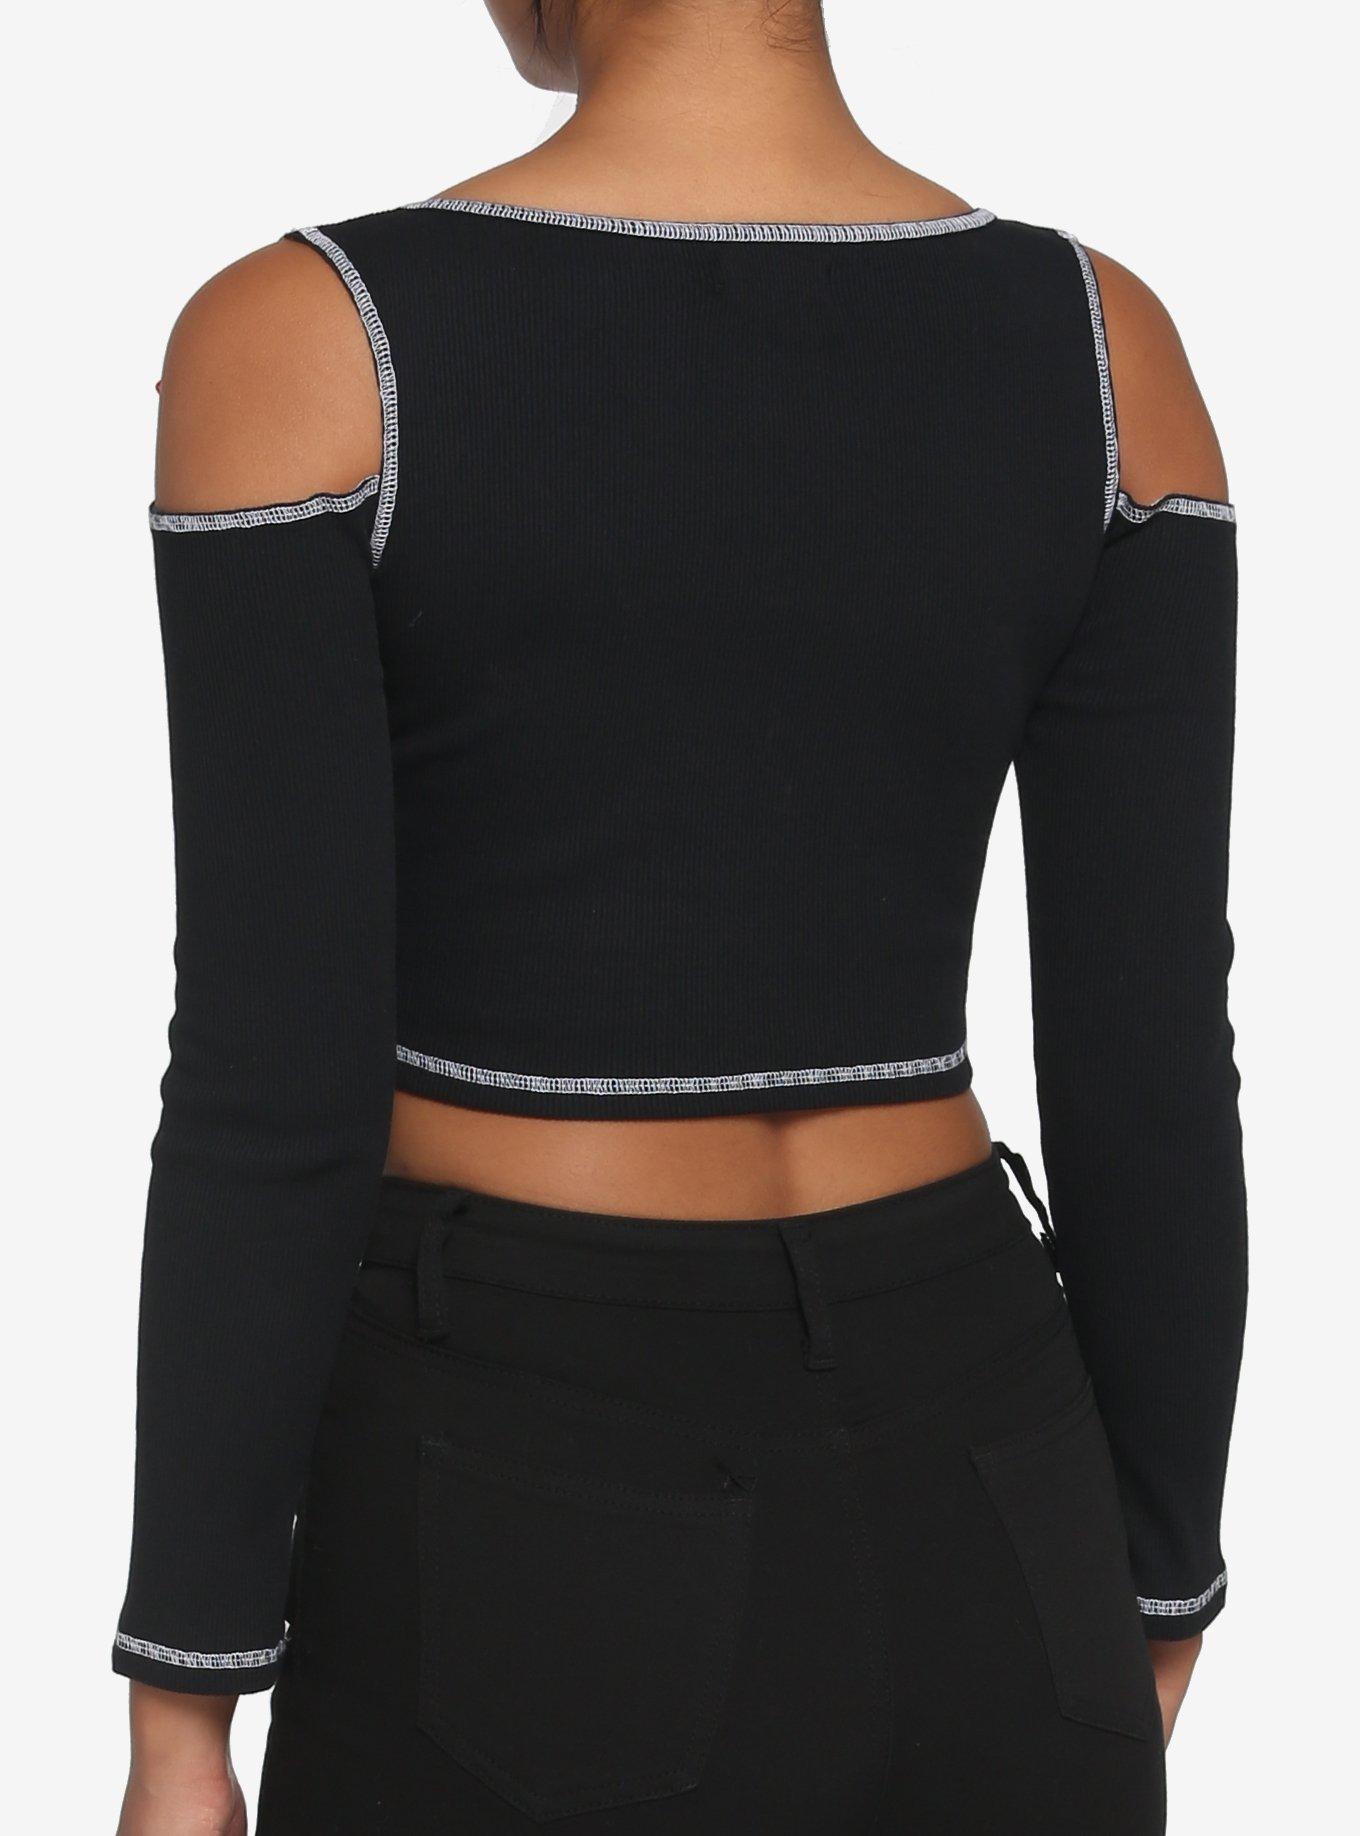 Hot Topic Lace-Up Contrast Ribbed Cold Shoulder Girls Crop Long-Sleeve Top